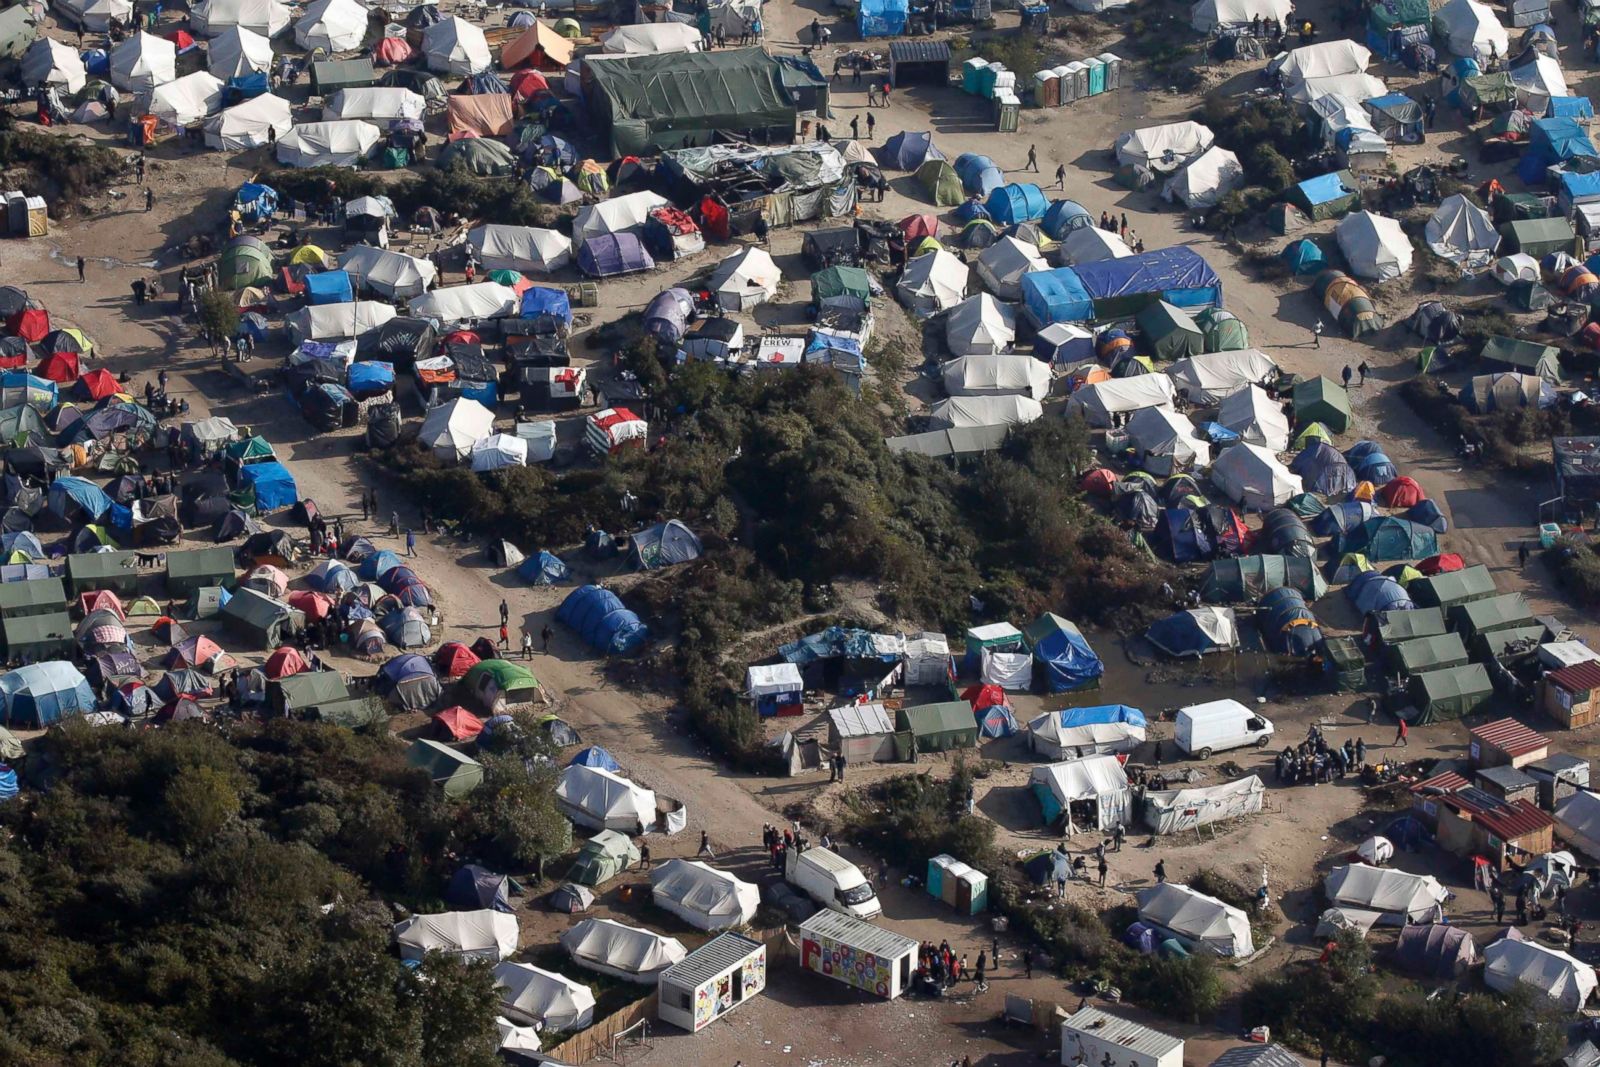 Calais Migrant Camp in France Is Dismantled Photos | Image #121 - ABC News